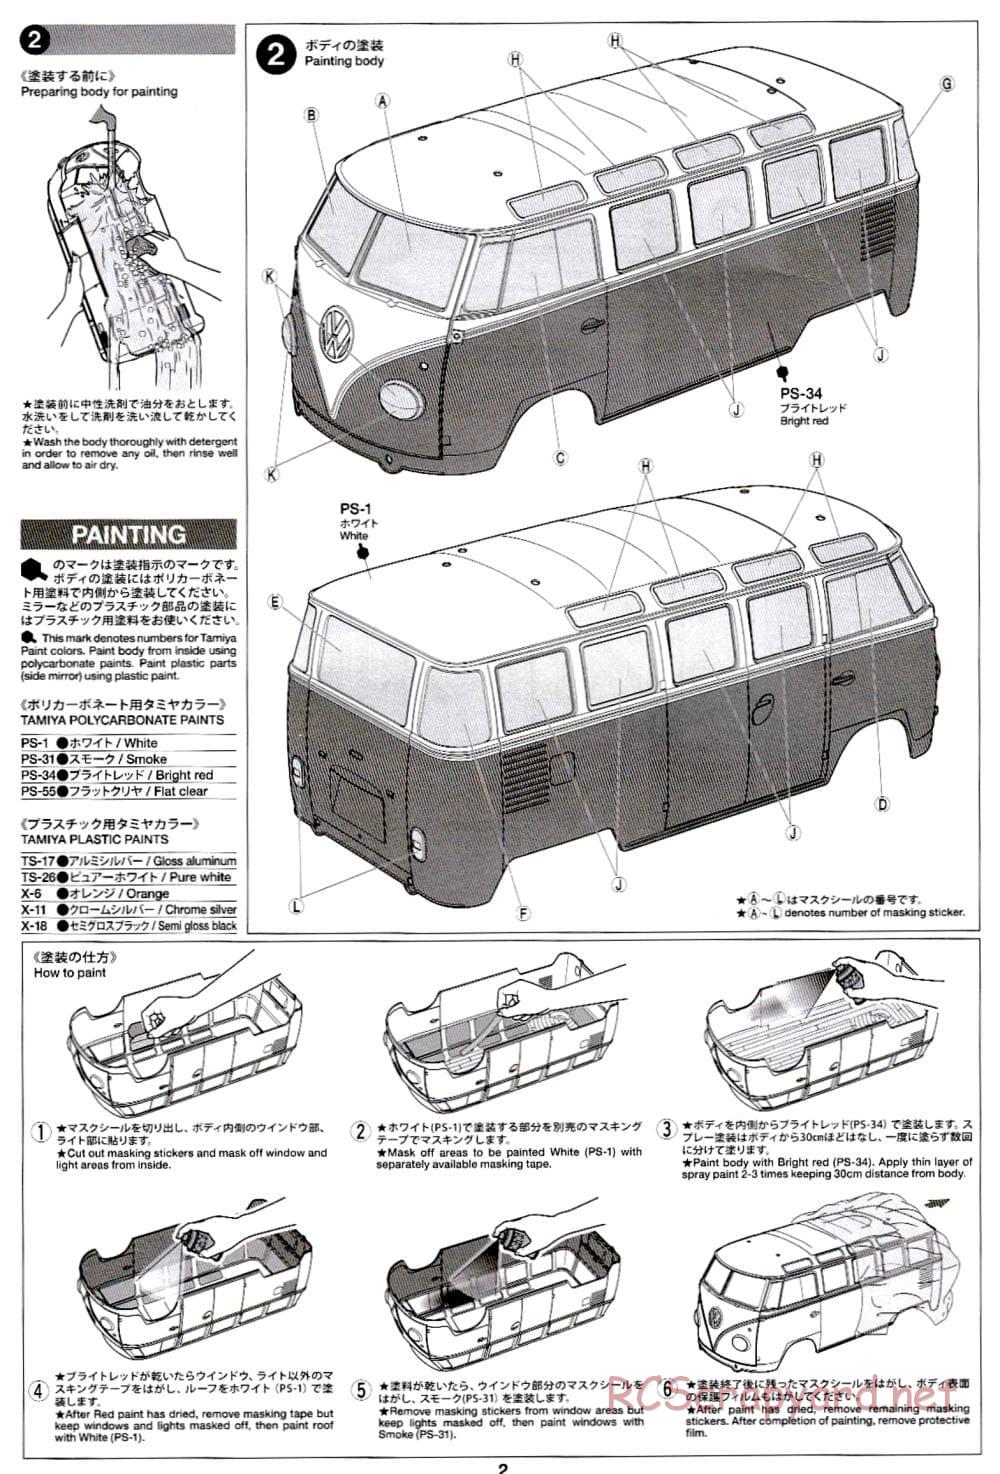 Tamiya - Volkswagen Type 2 (T1) - M-06 Chassis - Body Manual - Page 2